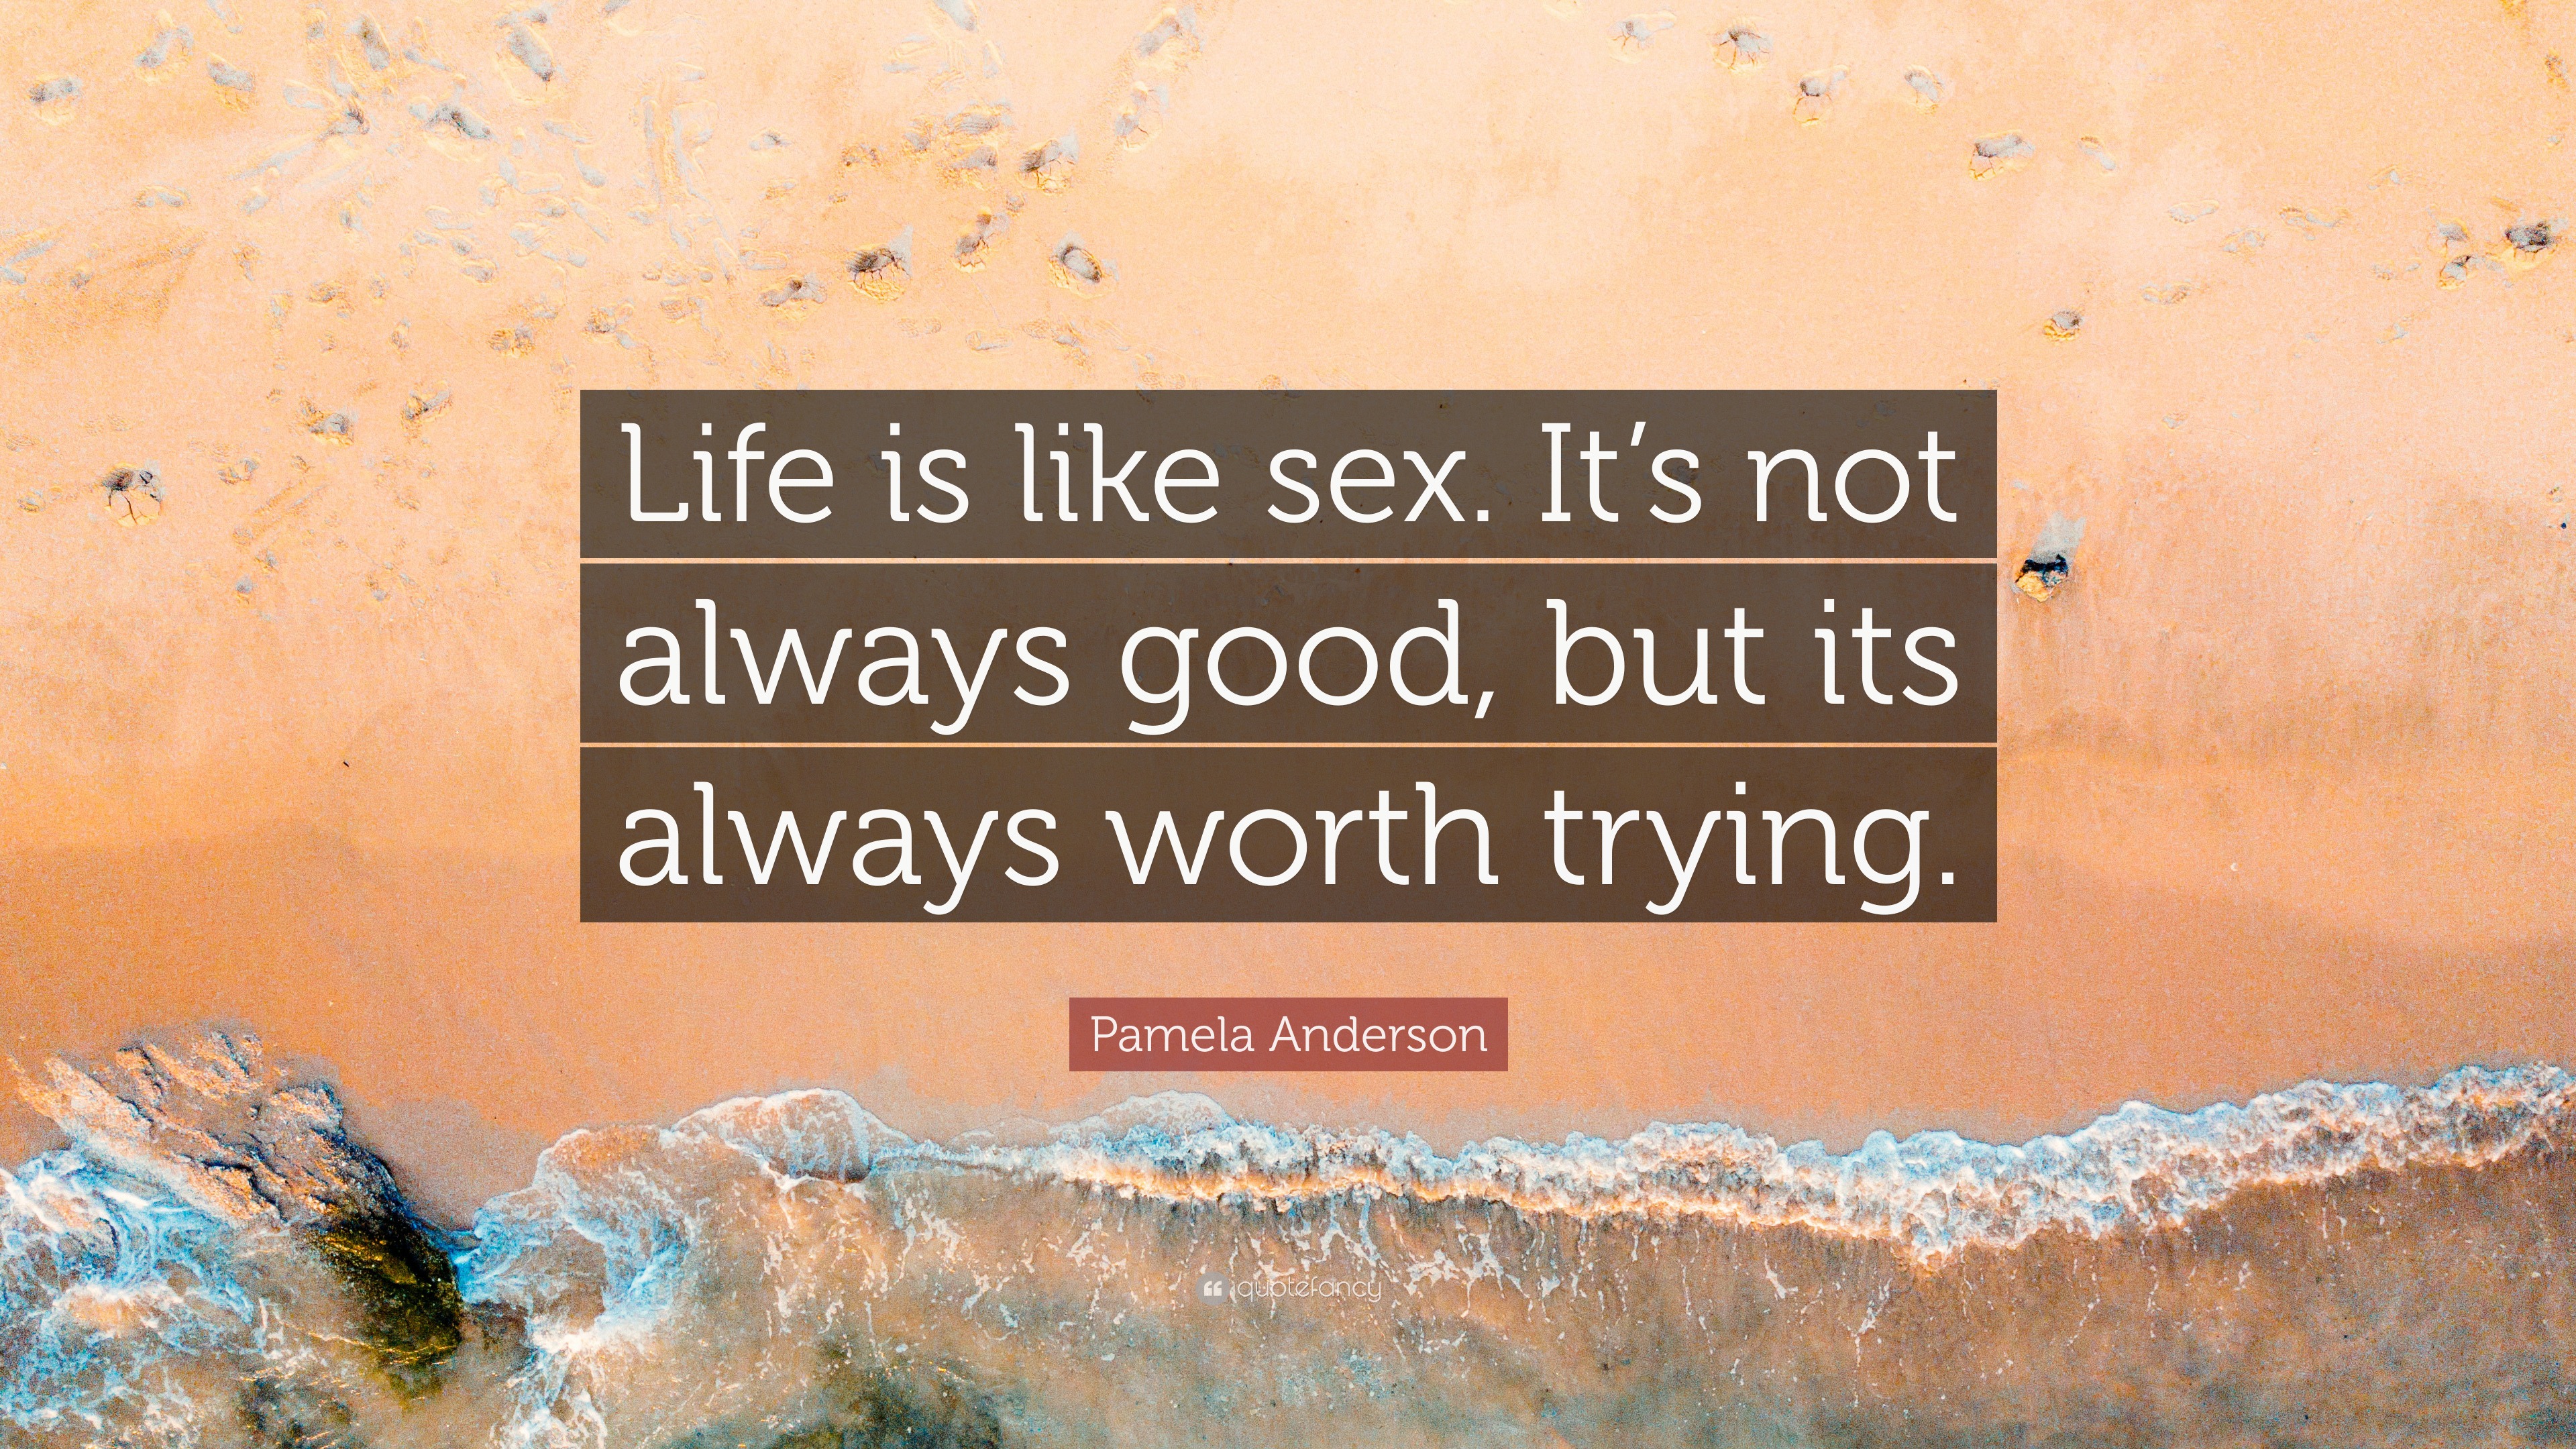 Pamela Anderson Quote “life Is Like Sex It S Not Always Good But Its Always Worth Trying ”